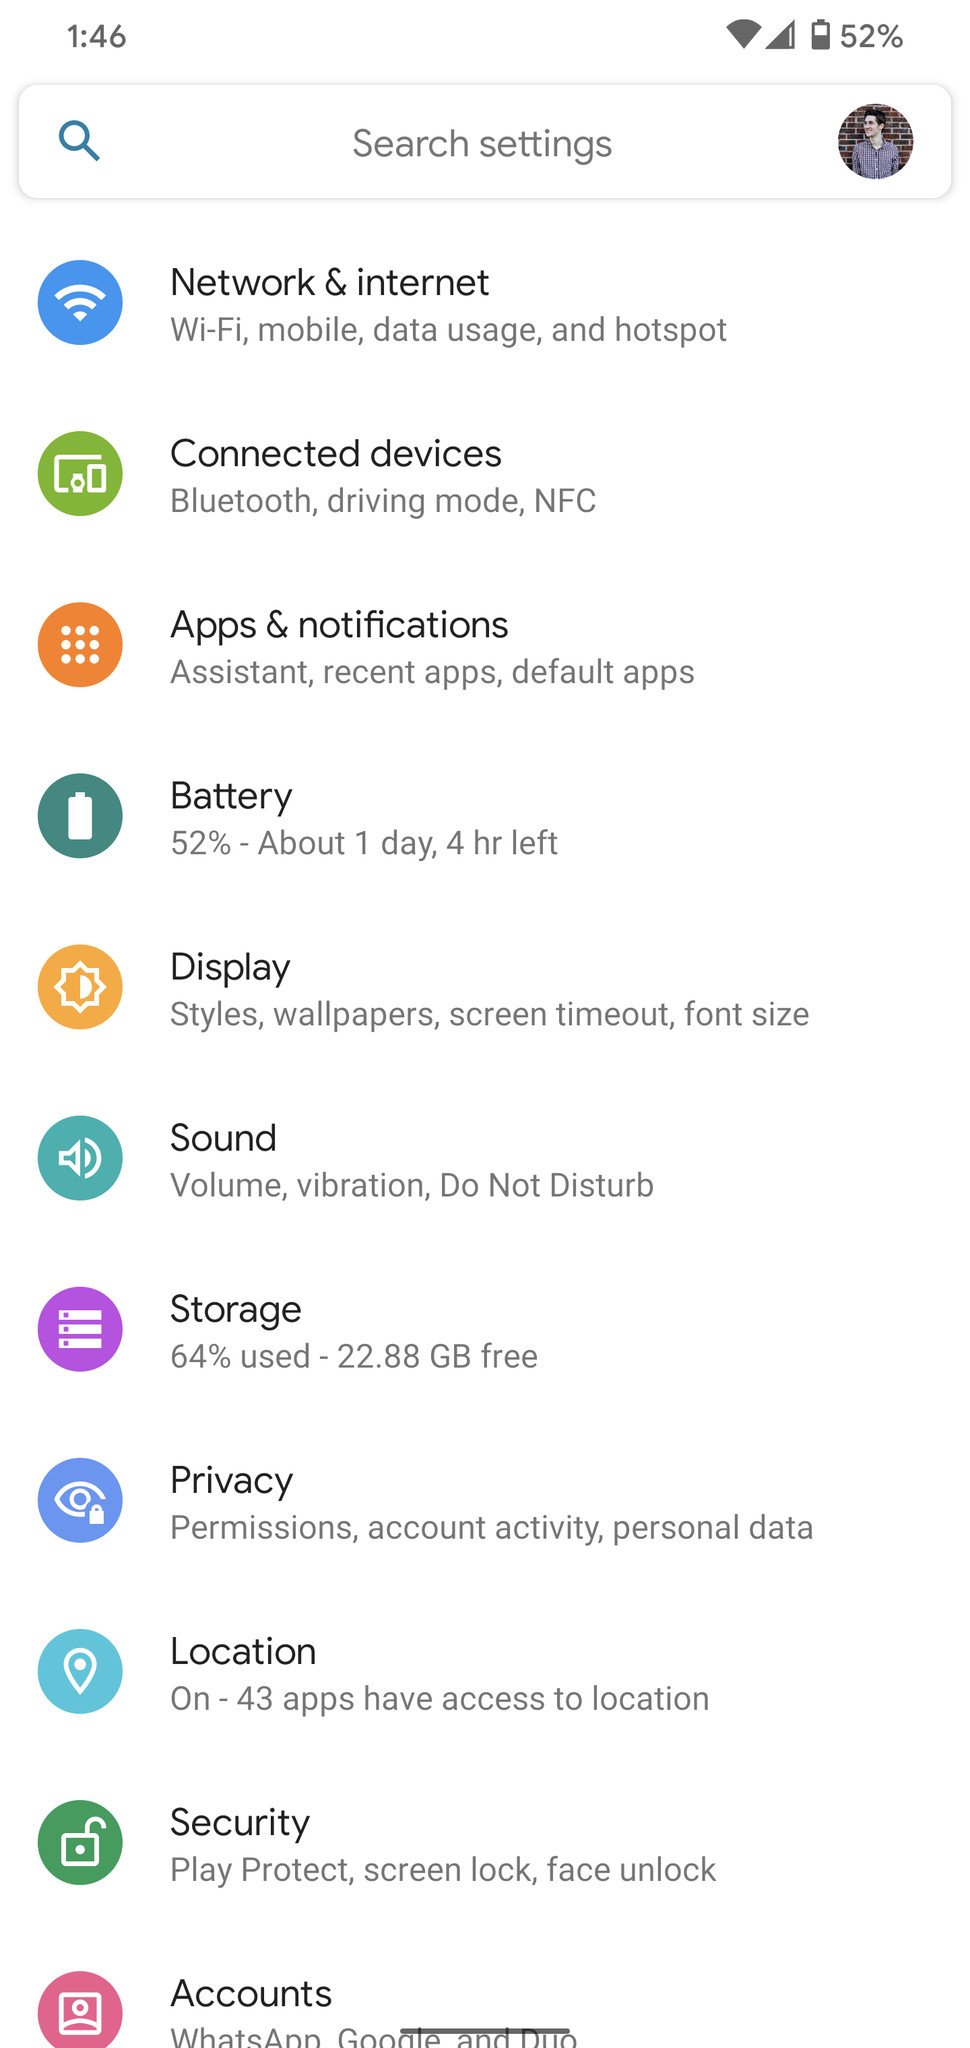 Android App Permissions